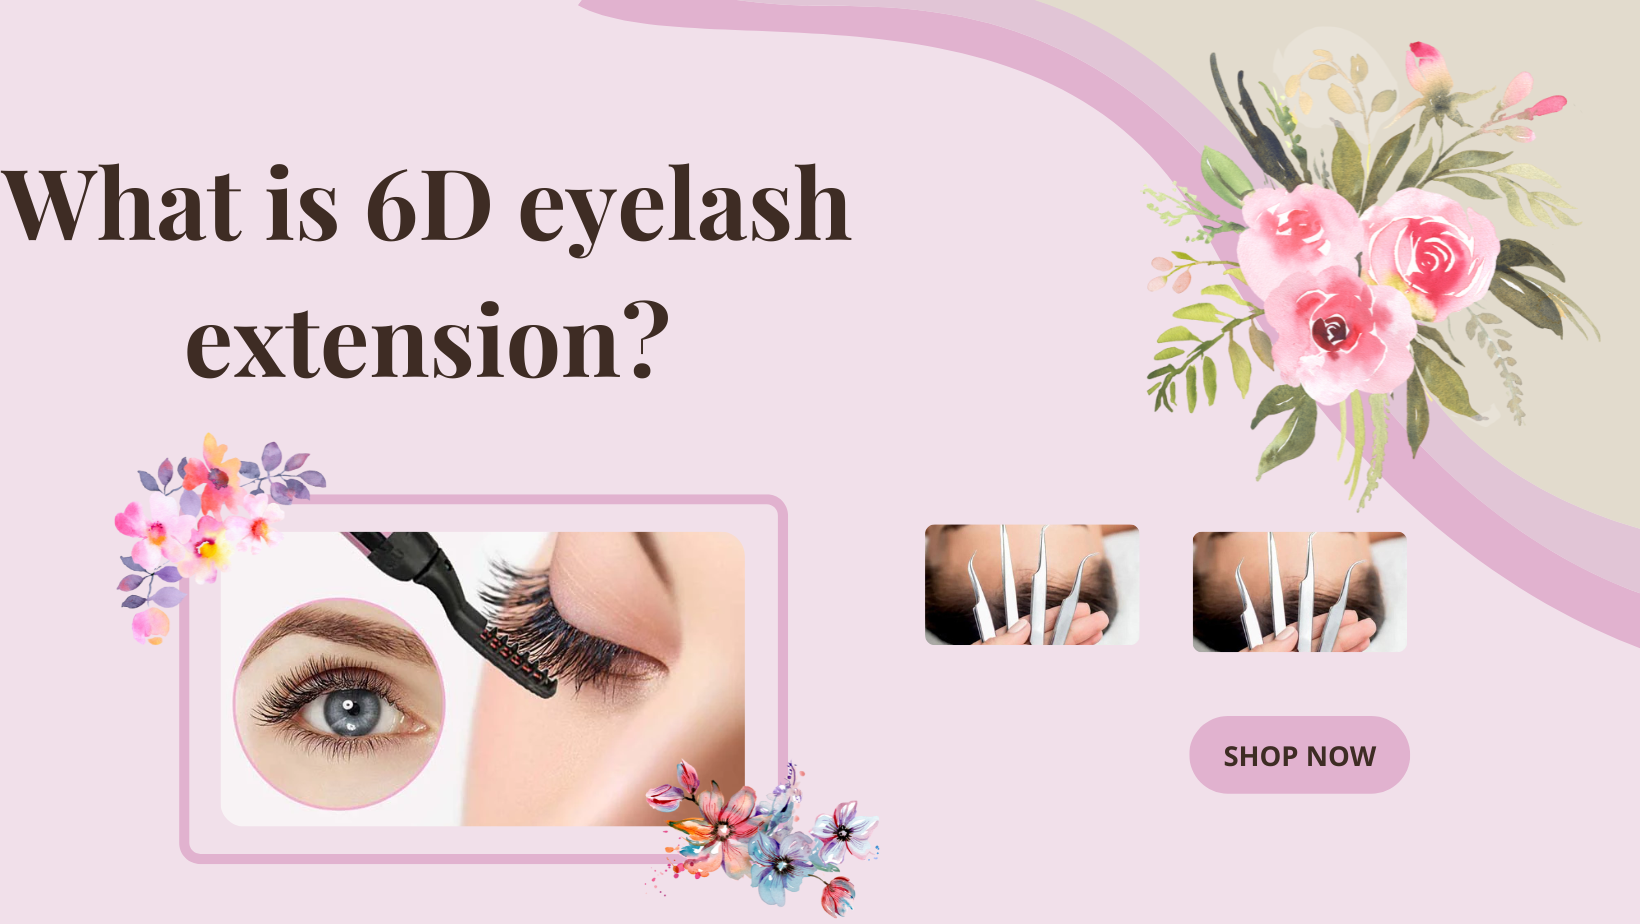 What is 6D eyelash extension?